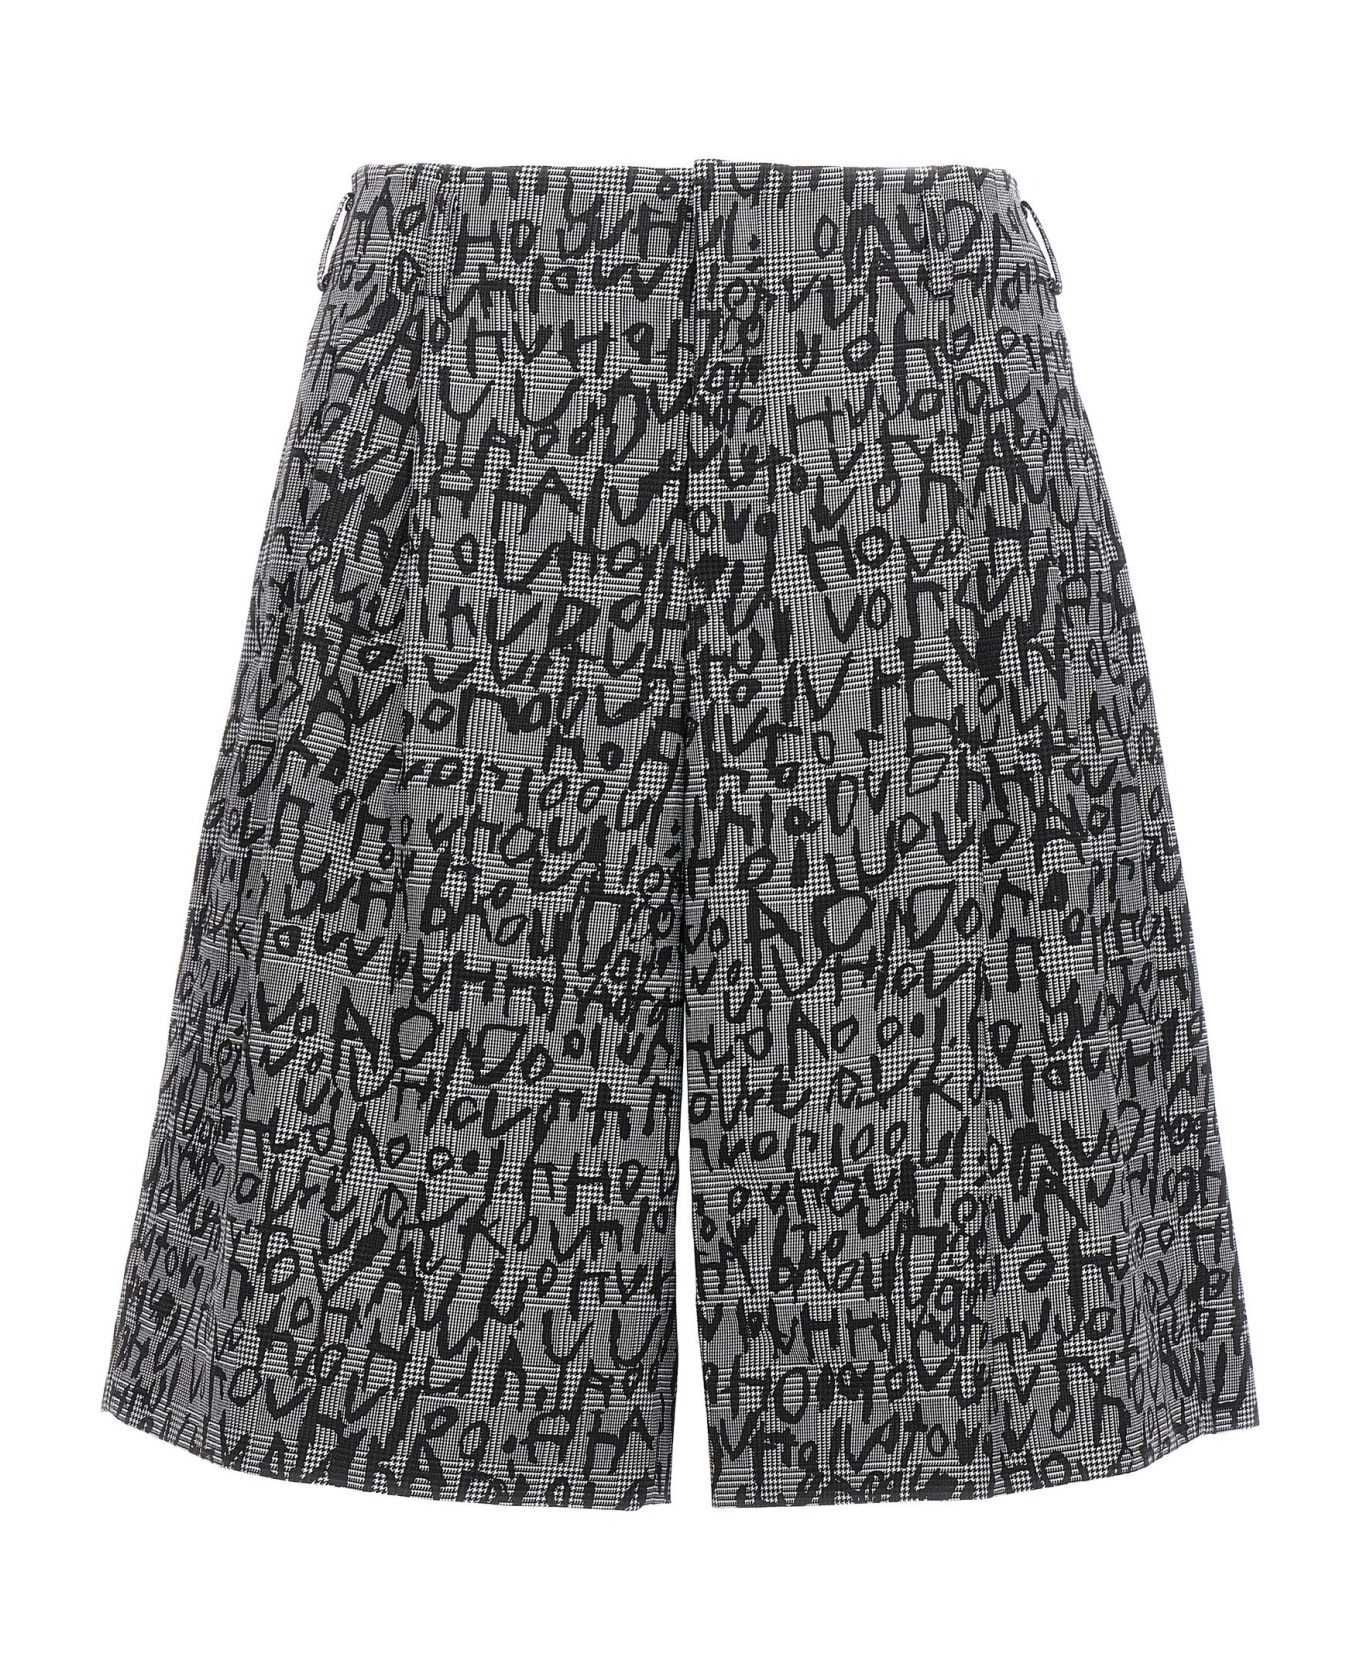 Comme Des Garçons Homme Plus All Over Print Brmuda Shorts - Gray ボトムス